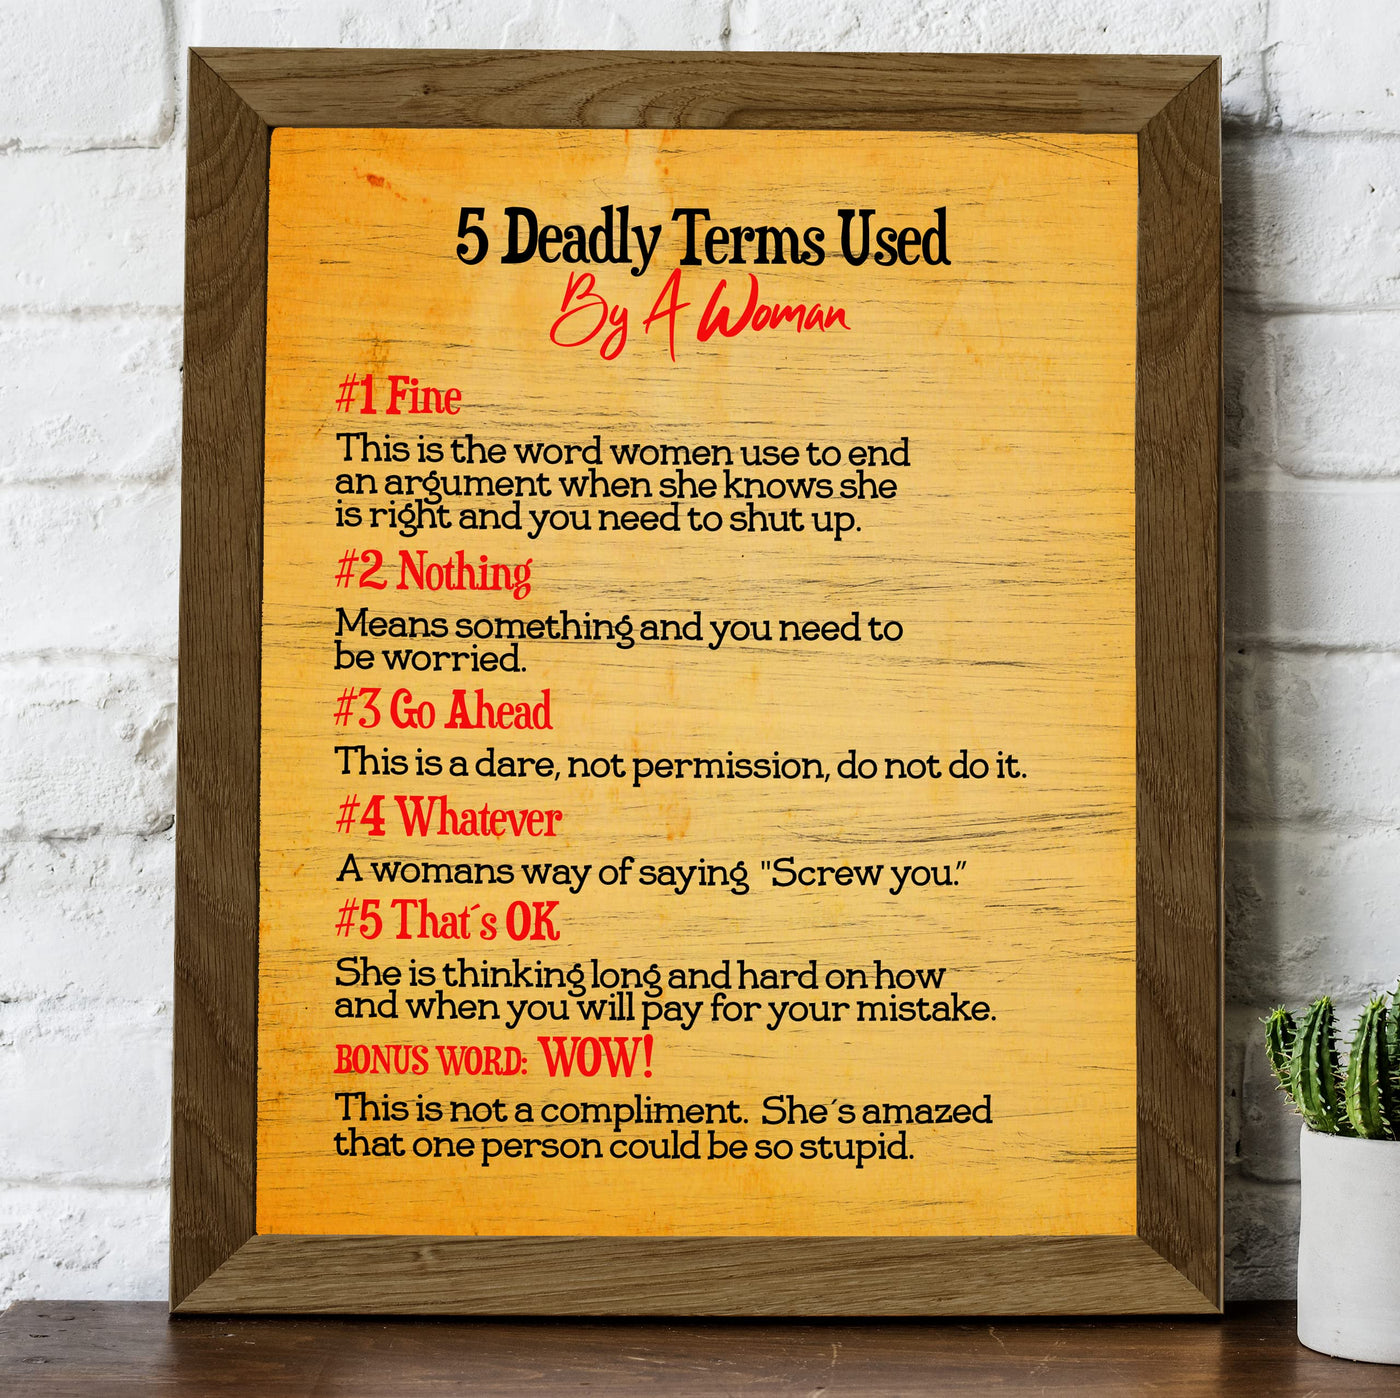 5 Deadly Terms Used By a Woman Funny Wall Decor -8 x 10" Sarcastic Typographic Art Print -Ready to Frame. Rustic Design. Humorous Home-Office-Bar-Shop-Man Cave Decor. Great Novelty Sign & Fun Gift!